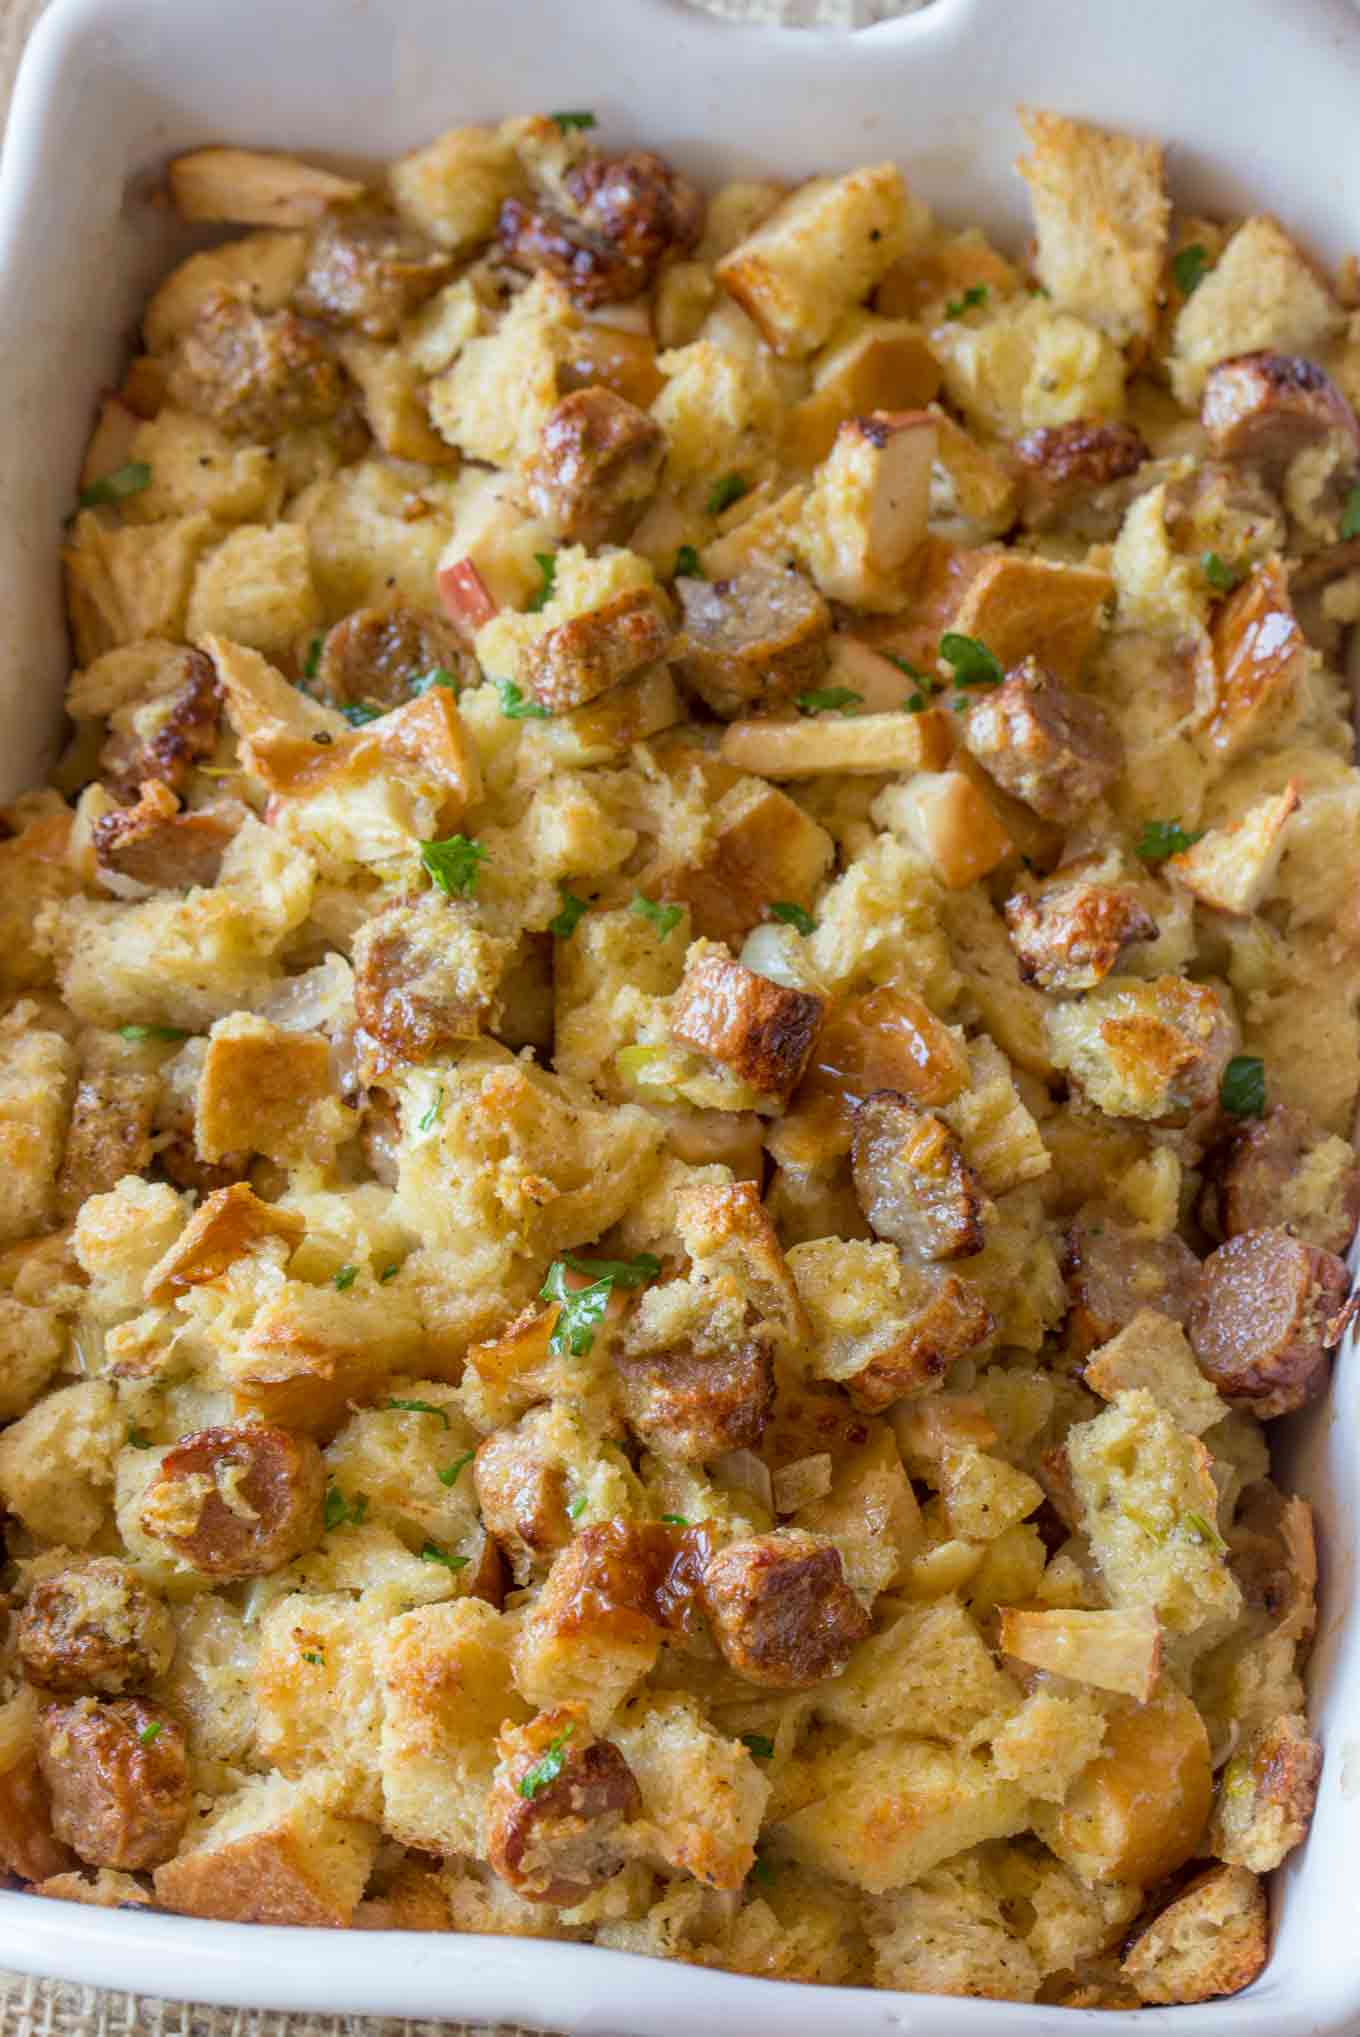 Slow Cooker Sage and Sausage Stuffing Recipe